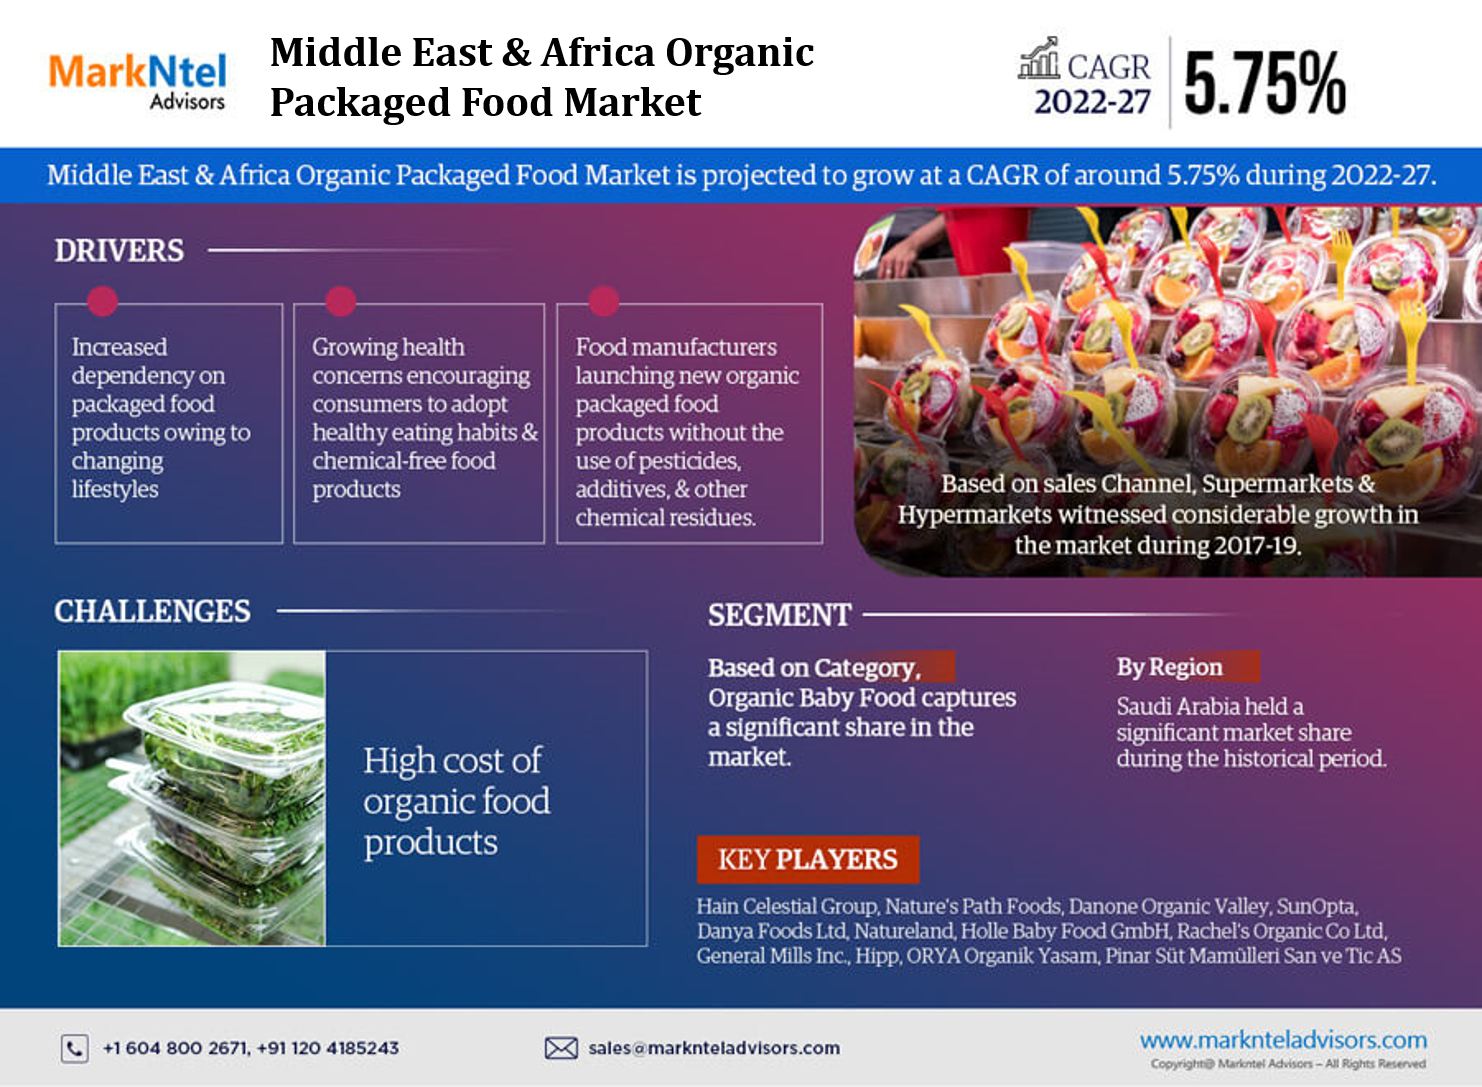 Middle East & Africa Organic Packaged Food Market